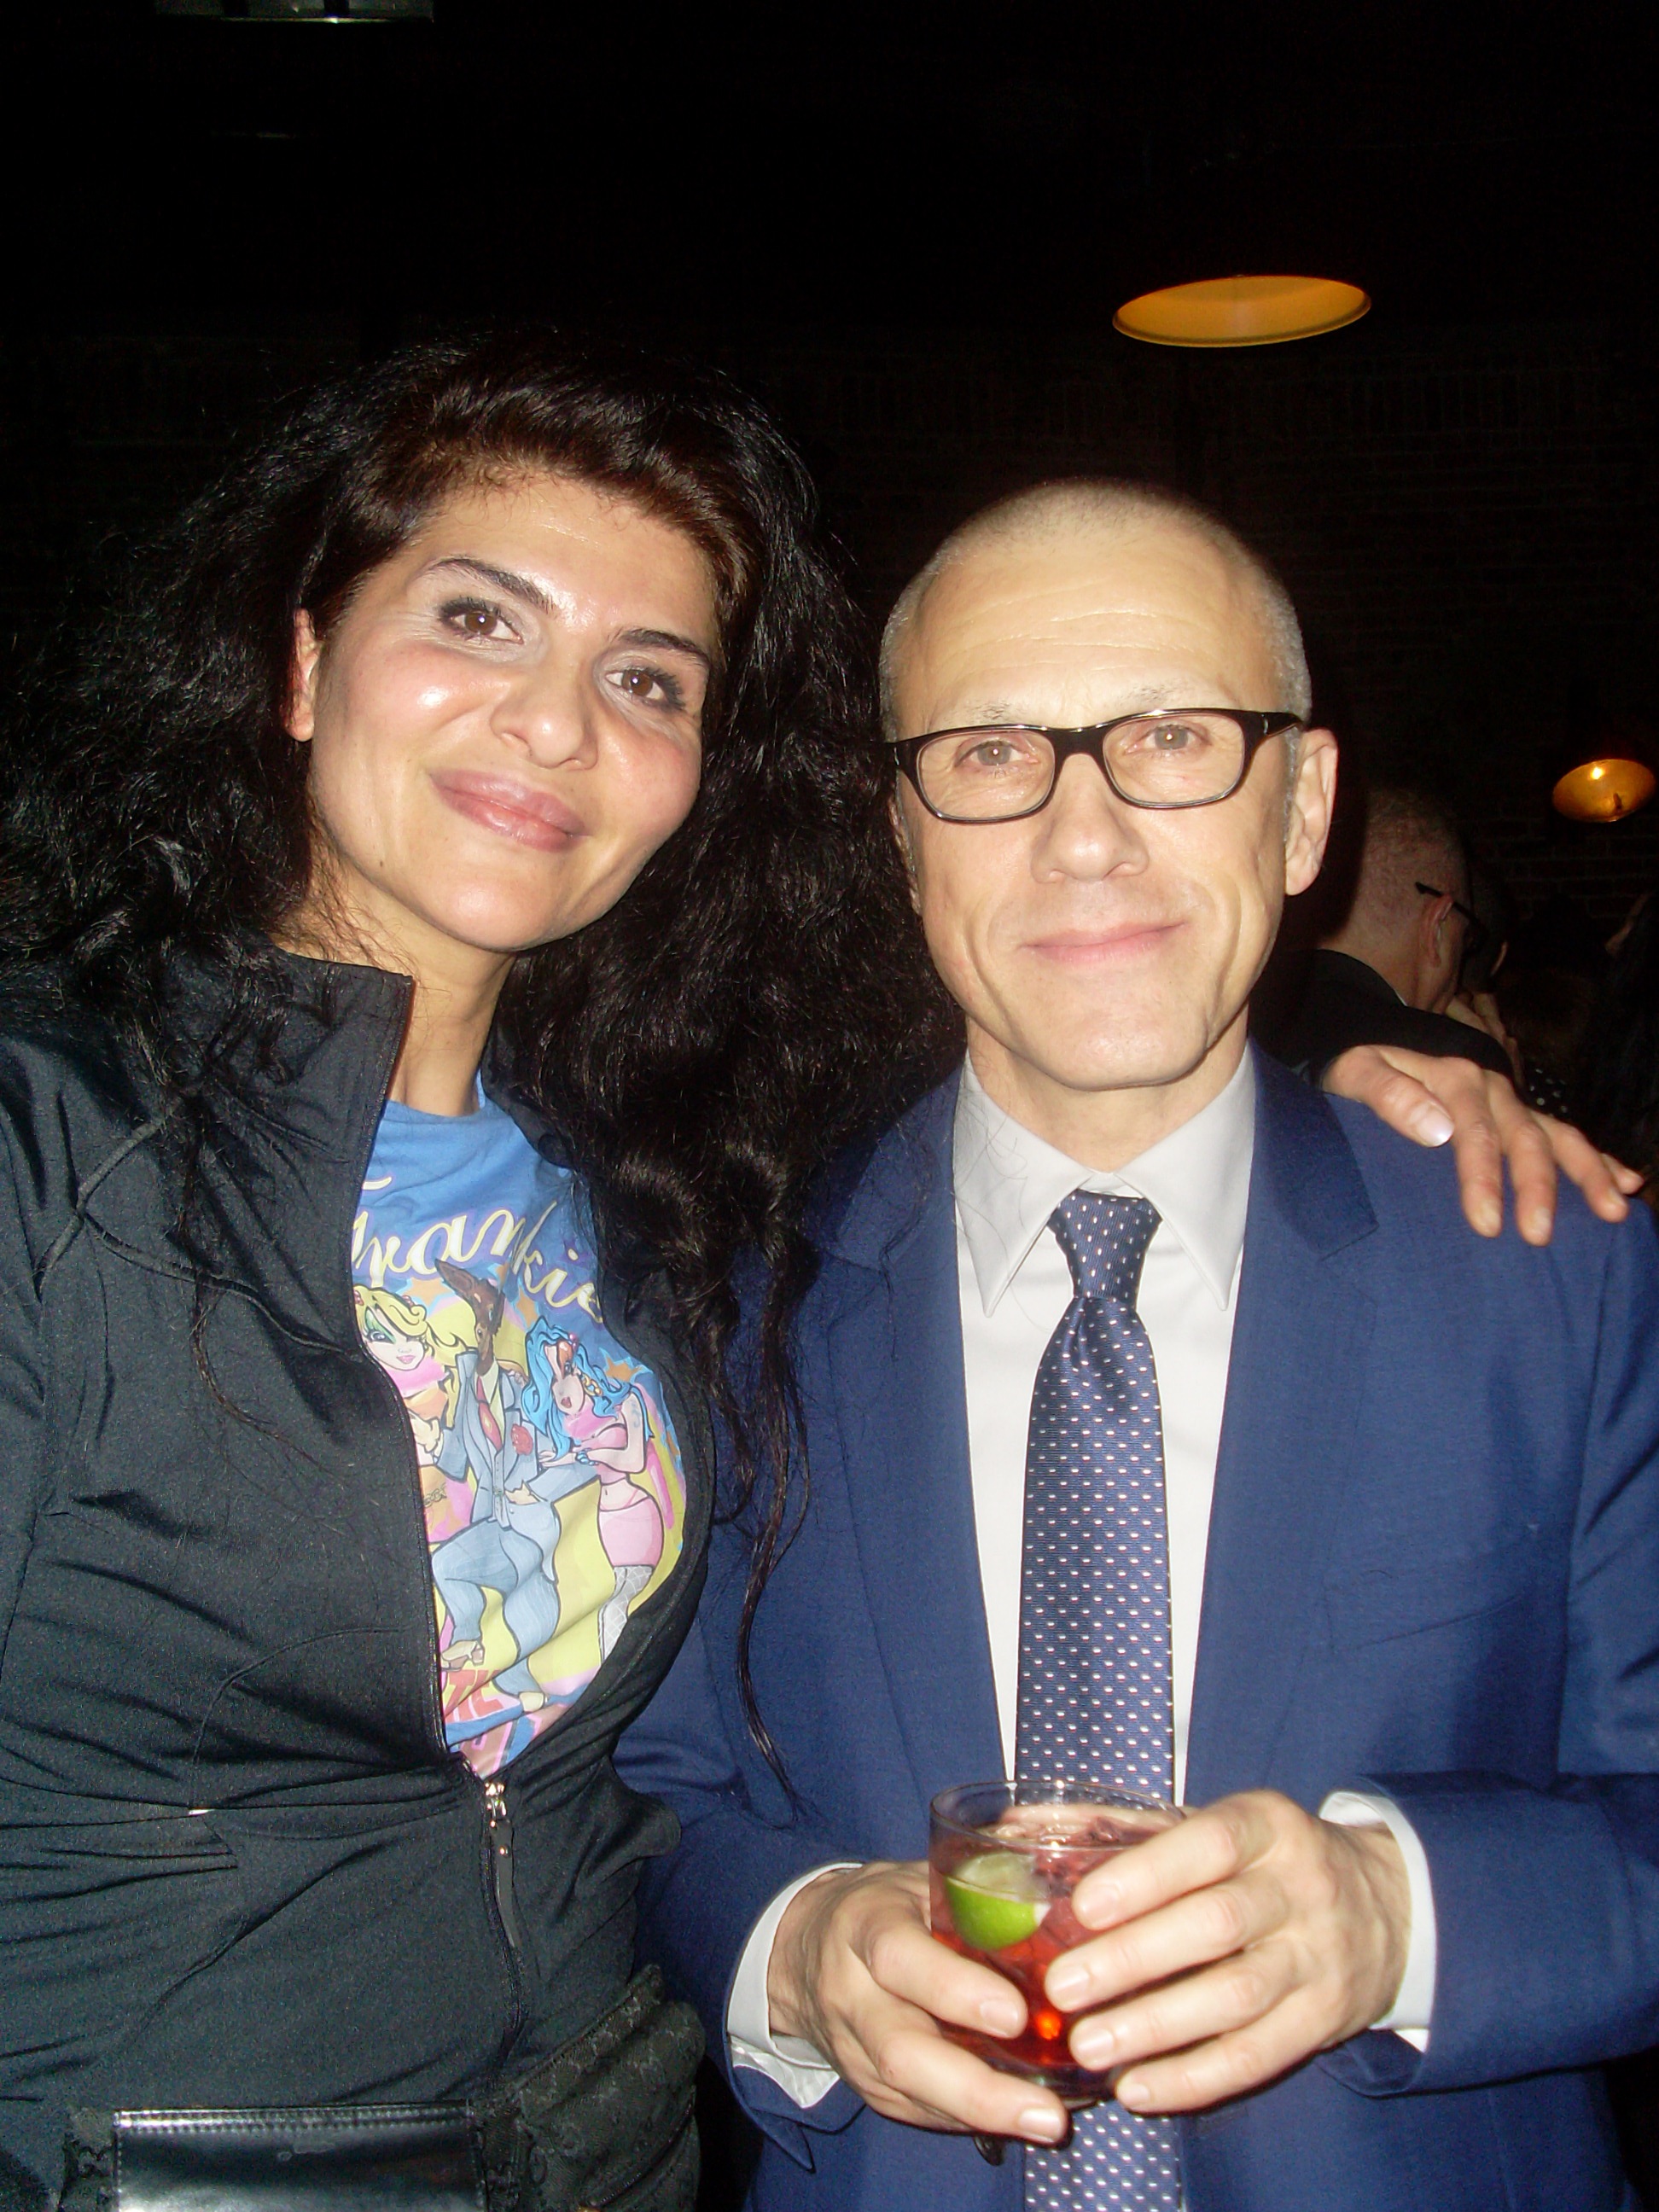 Naz Homa with Actor/Director/Writer Christoph Waltz